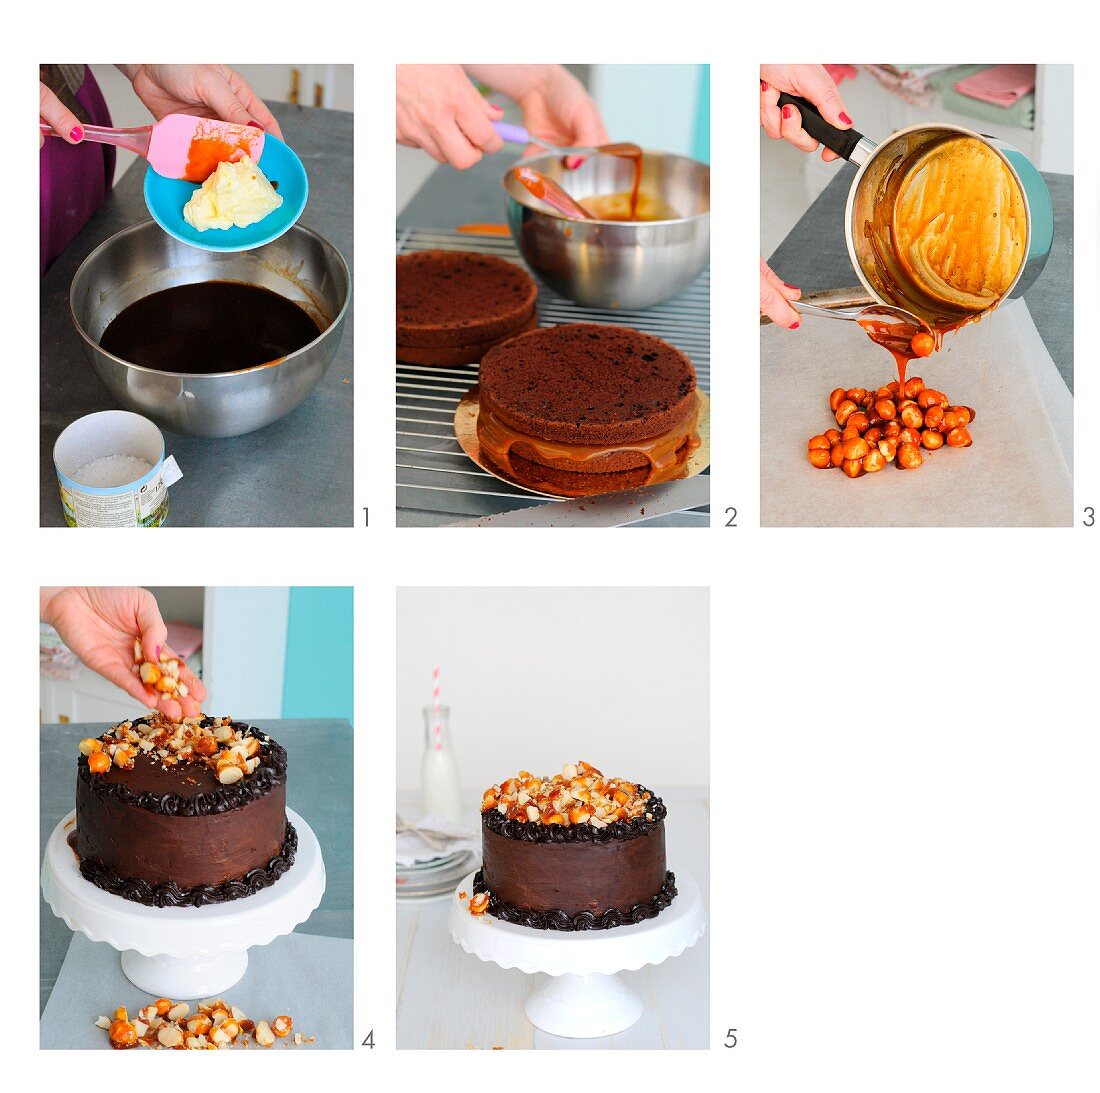 A chocolate cake with salted caramel and macadamia nuts being made